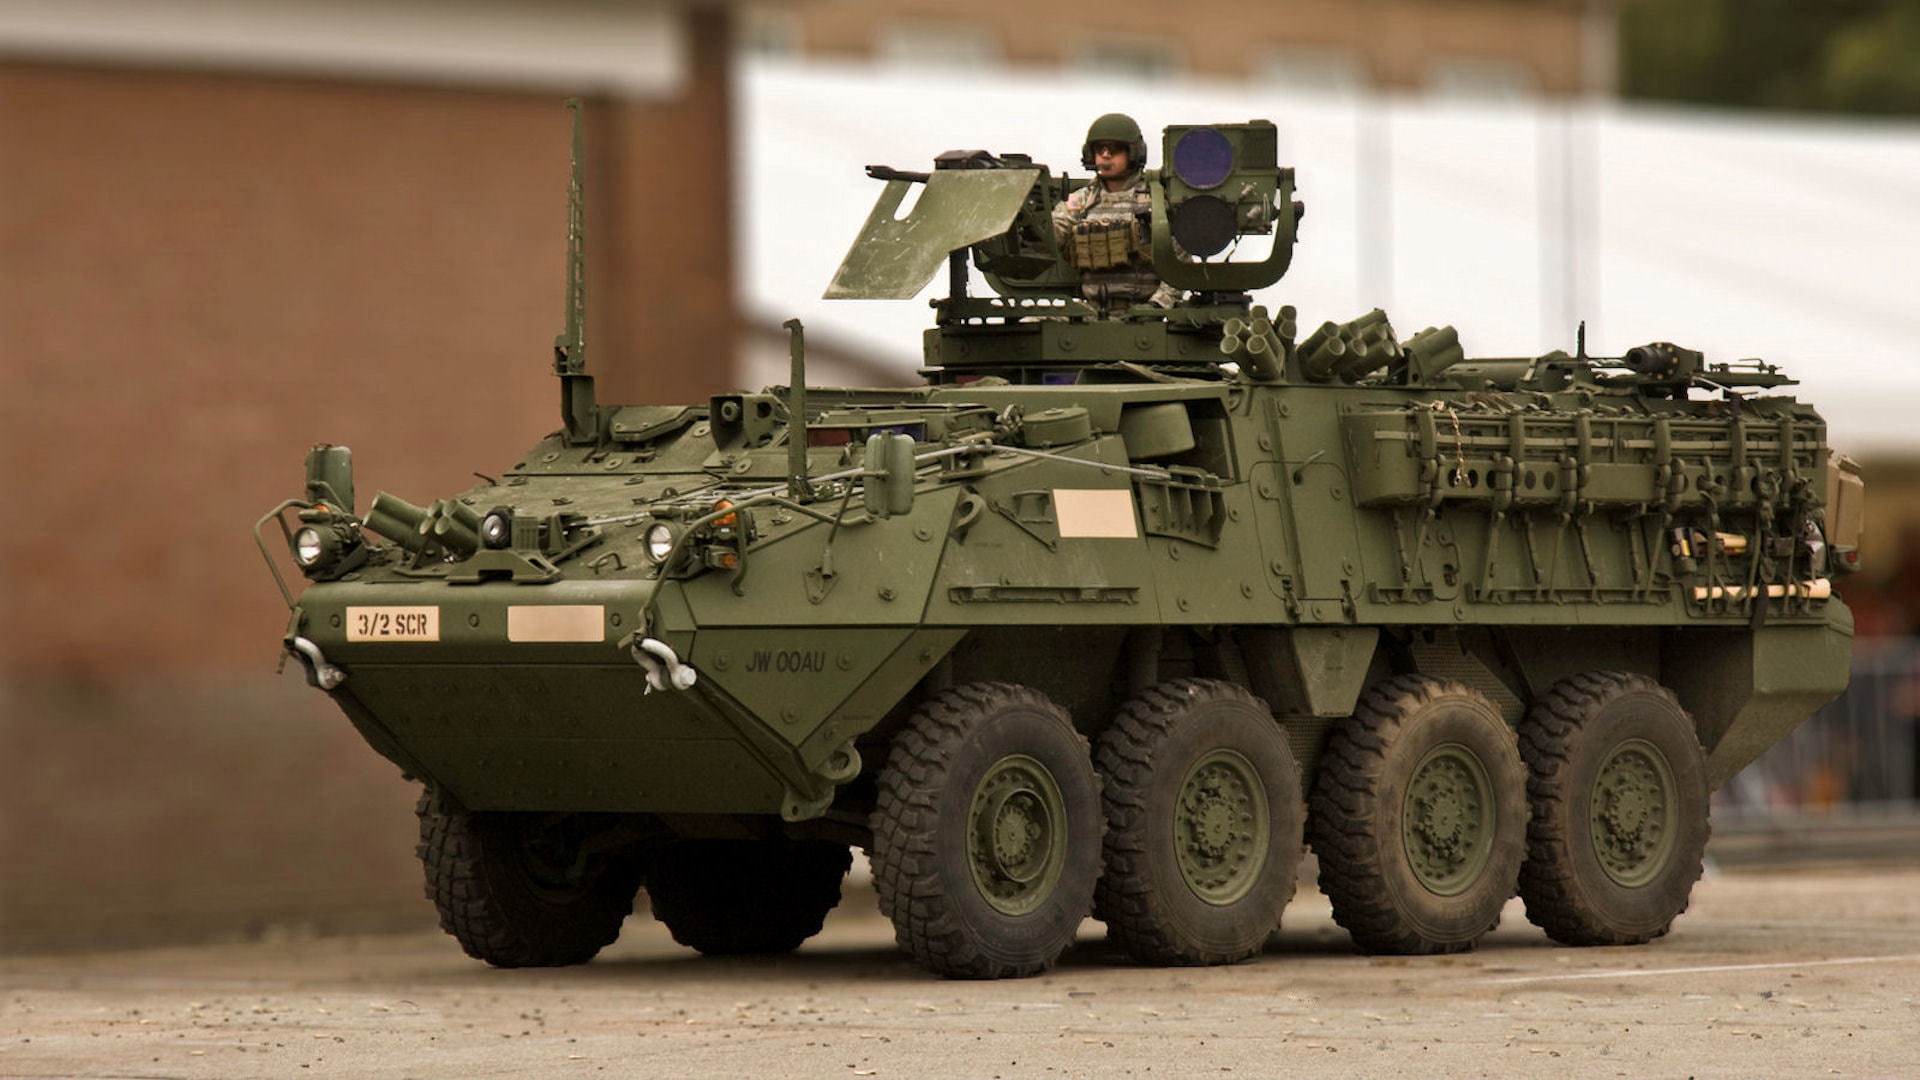 green army truck, Stryker, General Dynamics Land Systems, armored combat vehicle